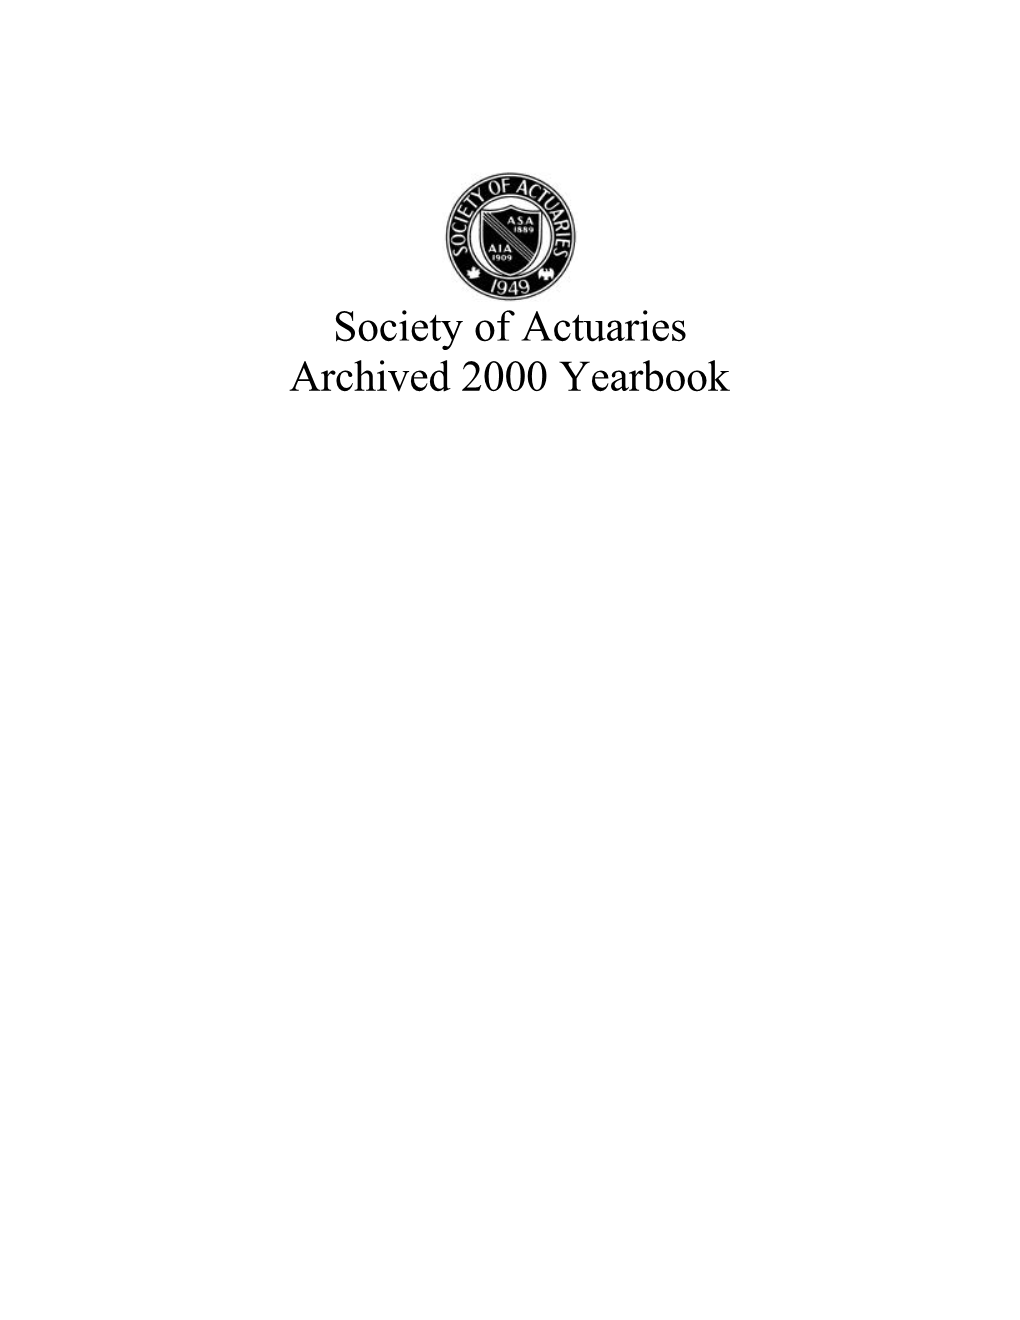 Society of Actuaries Archived 2000 Yearbook REQUIREMENTS for ADMISSION Page 1 of 3